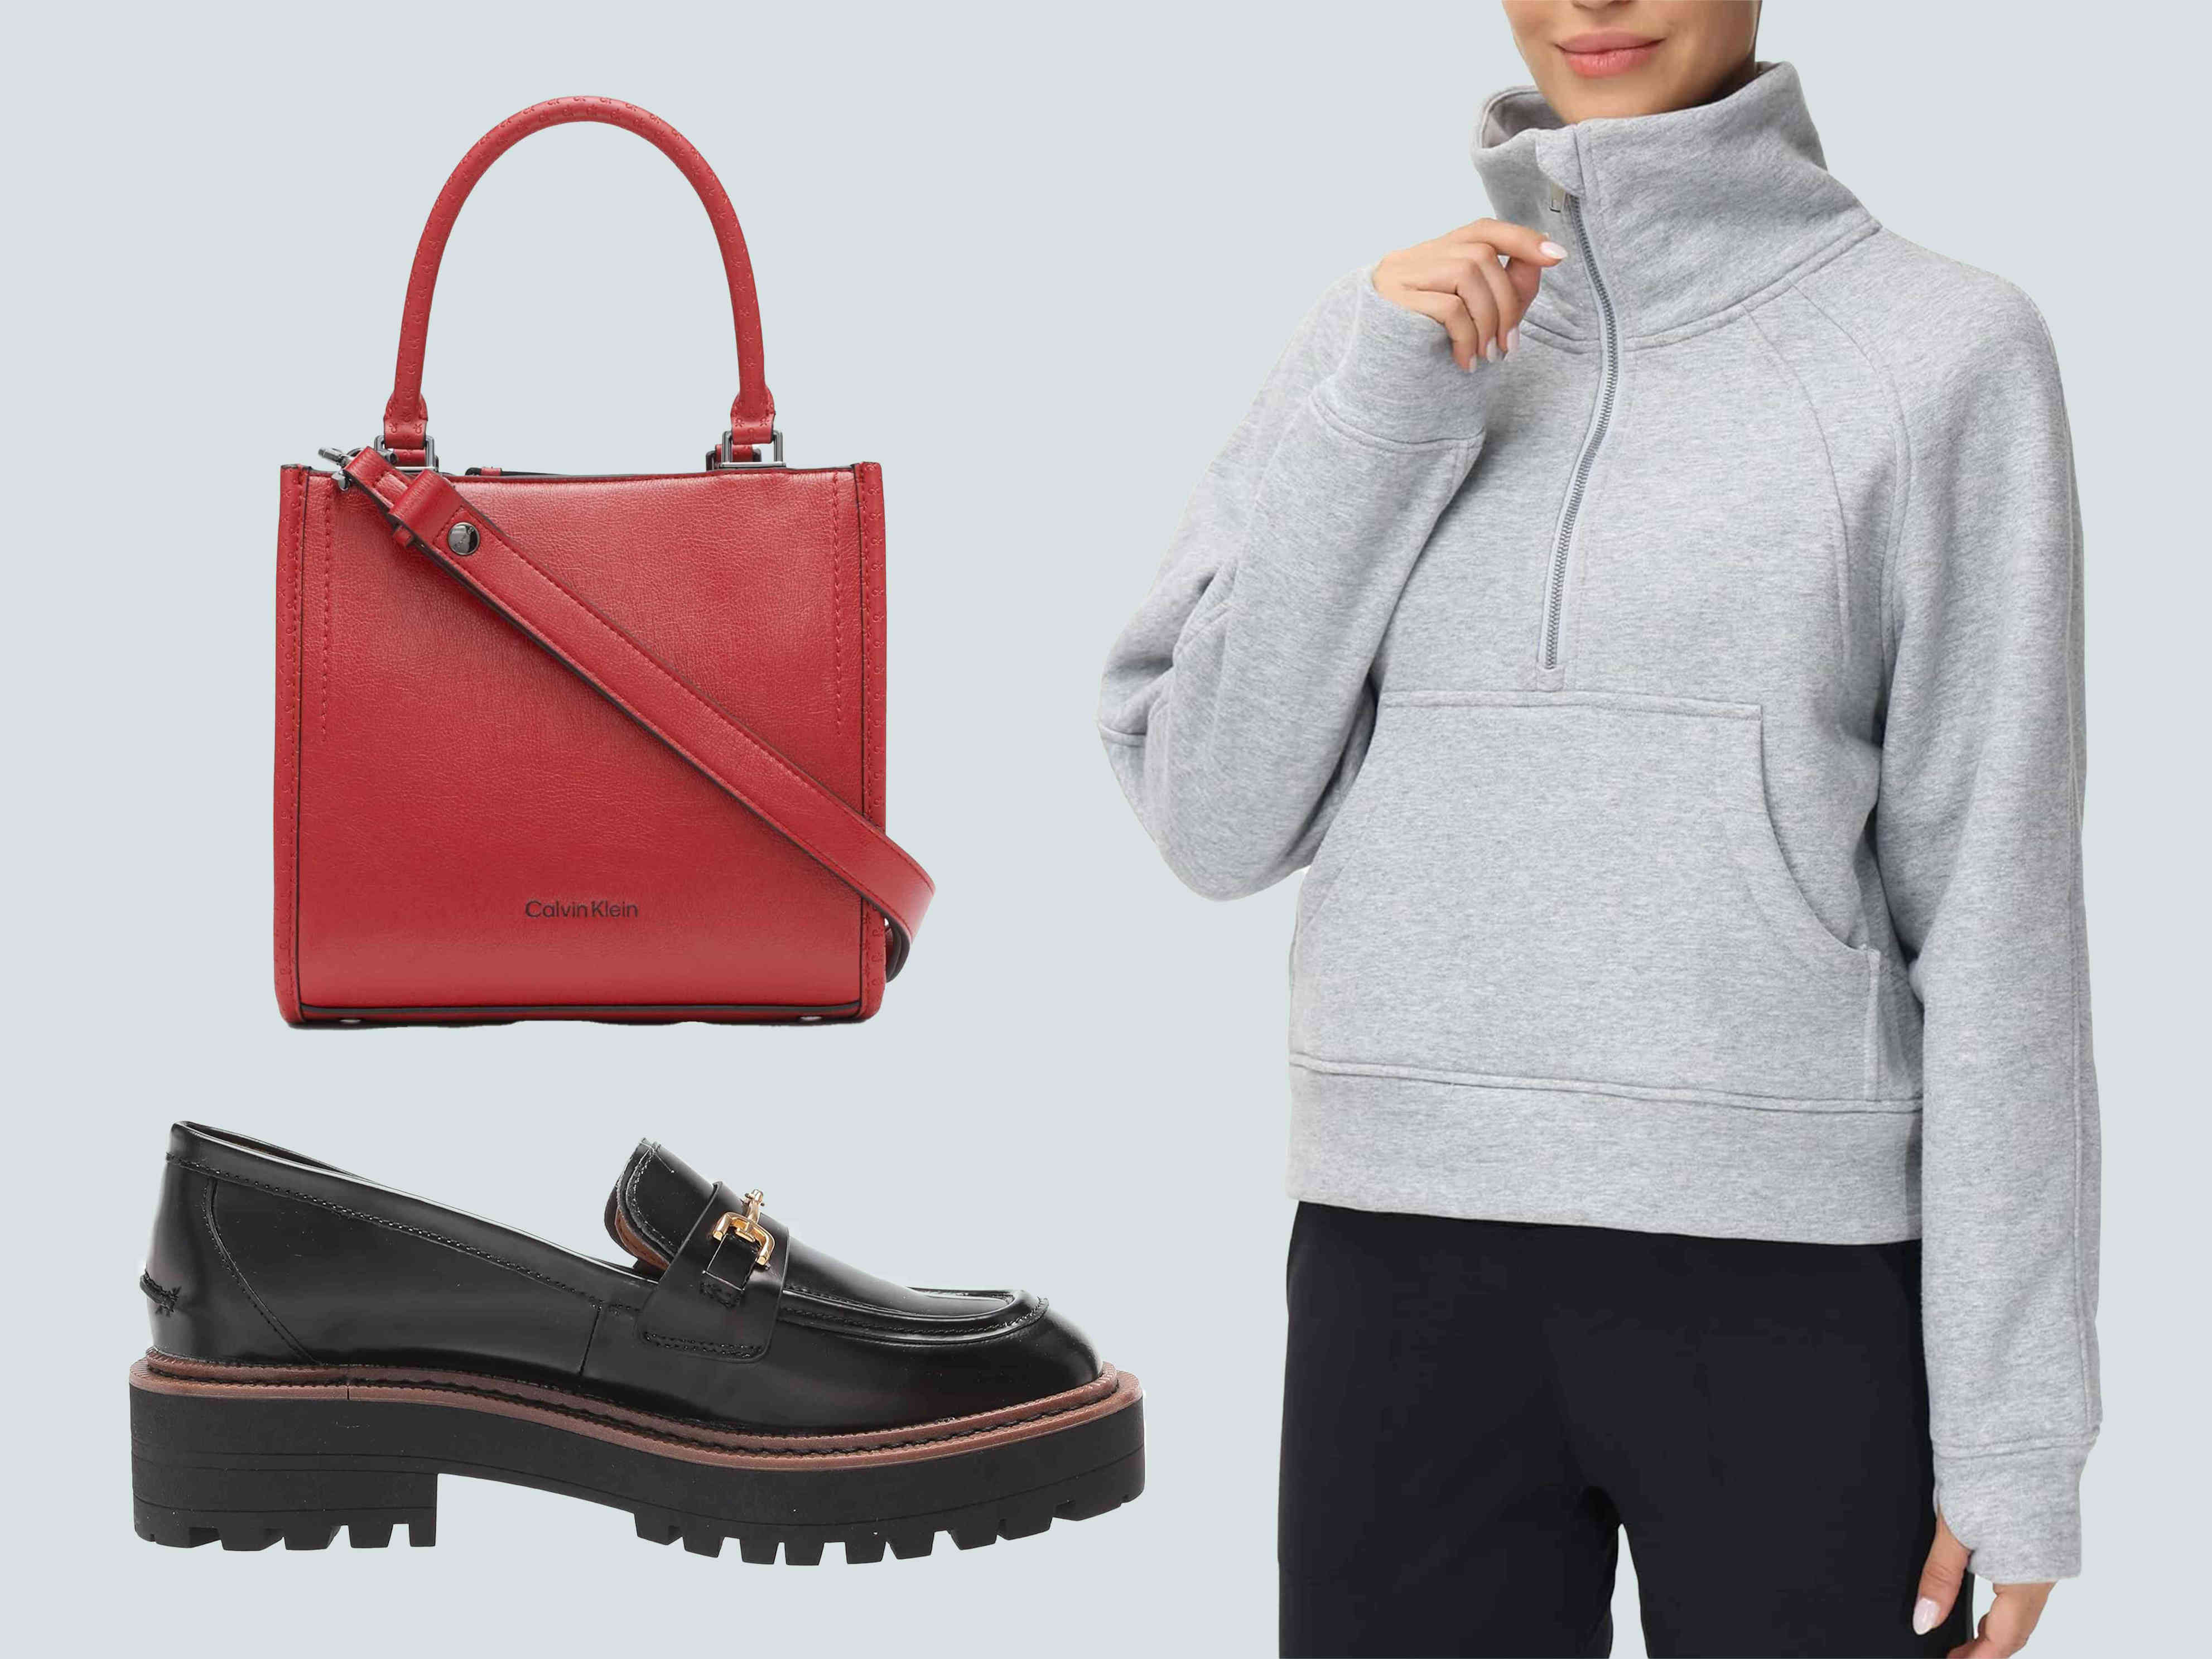 amazon, ugg shoes, levi's jeans, and calvin klein bags are up to 65% off at amazon